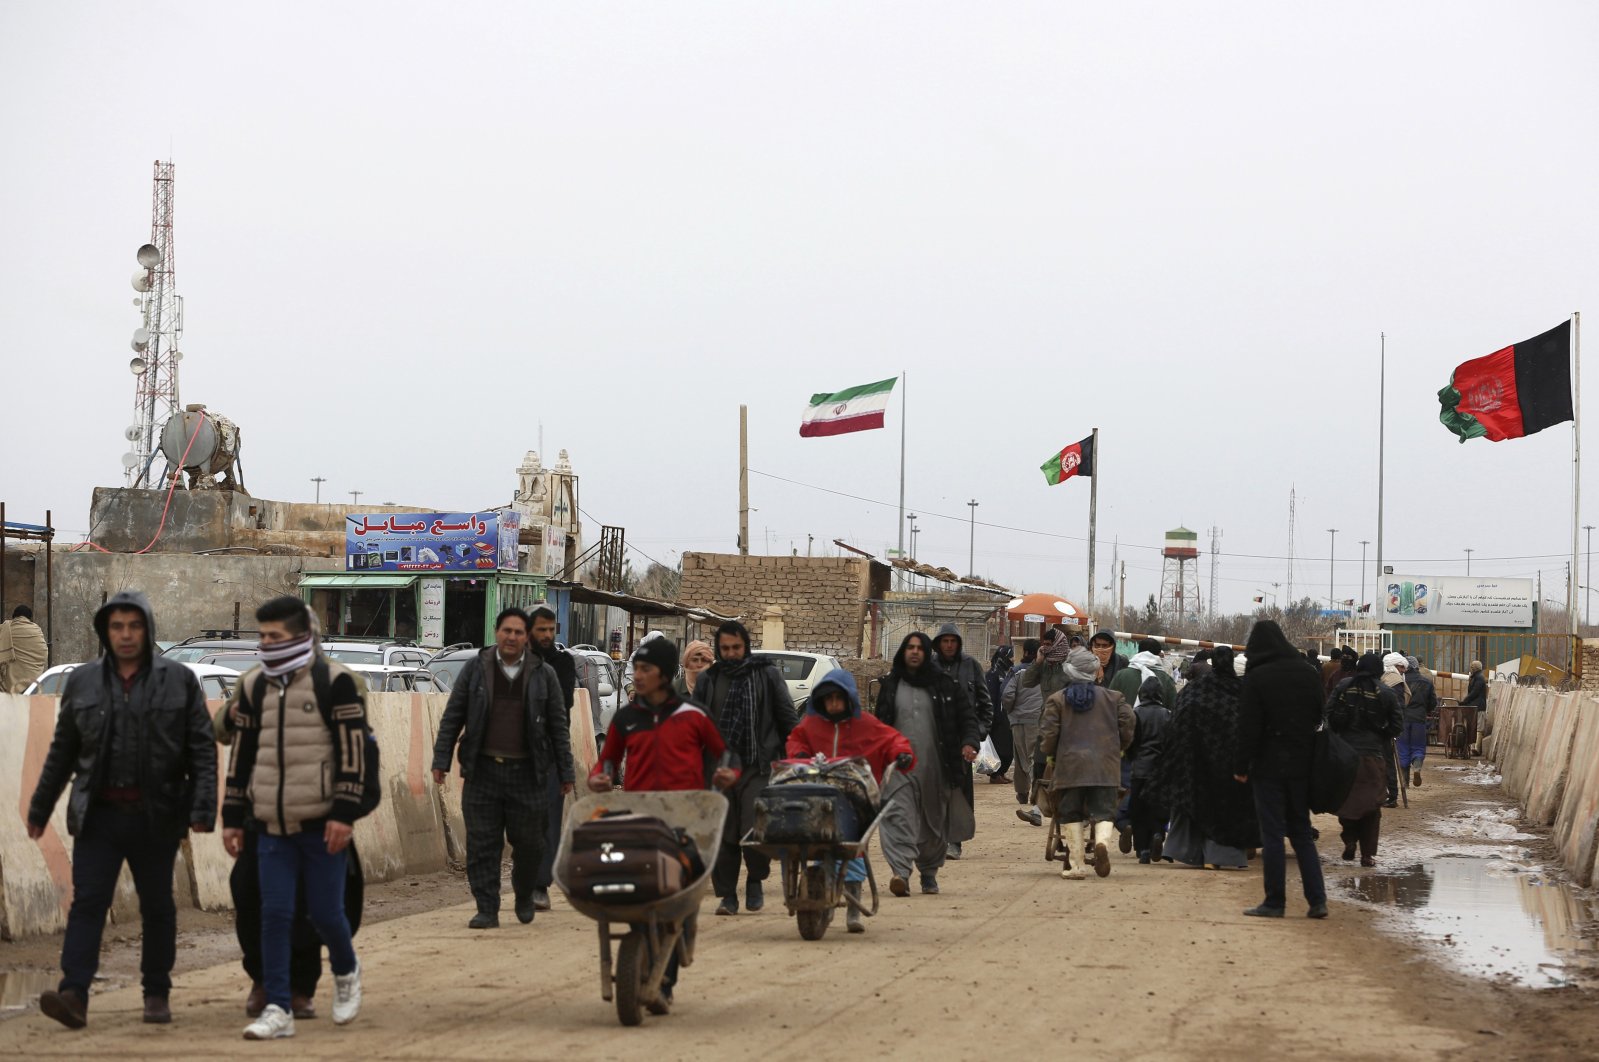 Afghans return to Afghanistan at the Islam Qala border with Iran, in the western Herat province, Afghanistan, Feb. 20, 2019. (AP Photo)